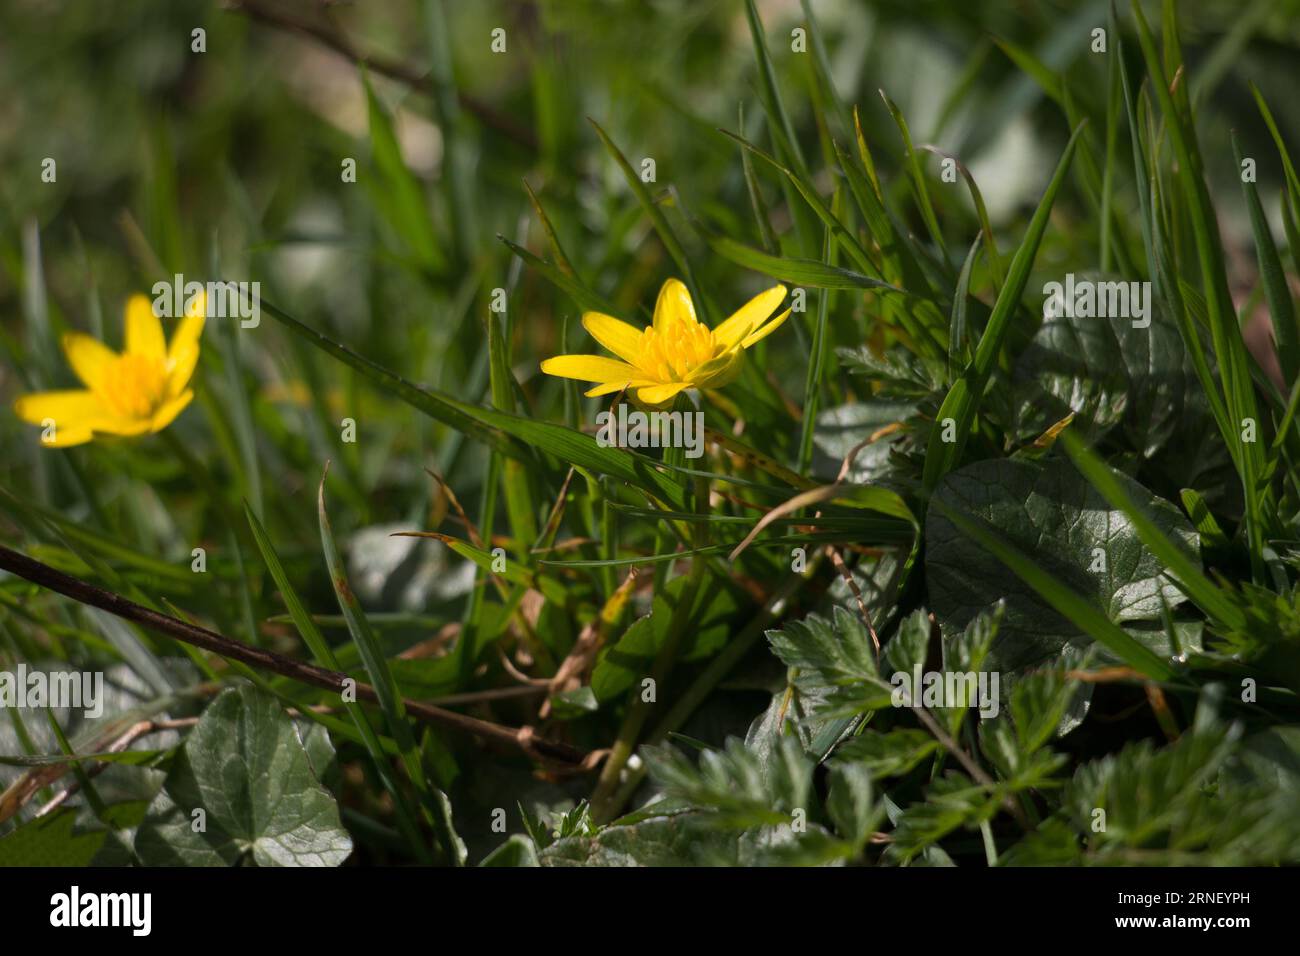 Spring wildflowers; Two yellow Lesser Celandine or pilewort flowers, Ficaria verna, blooming in woodland in the spring sunshine Stock Photo